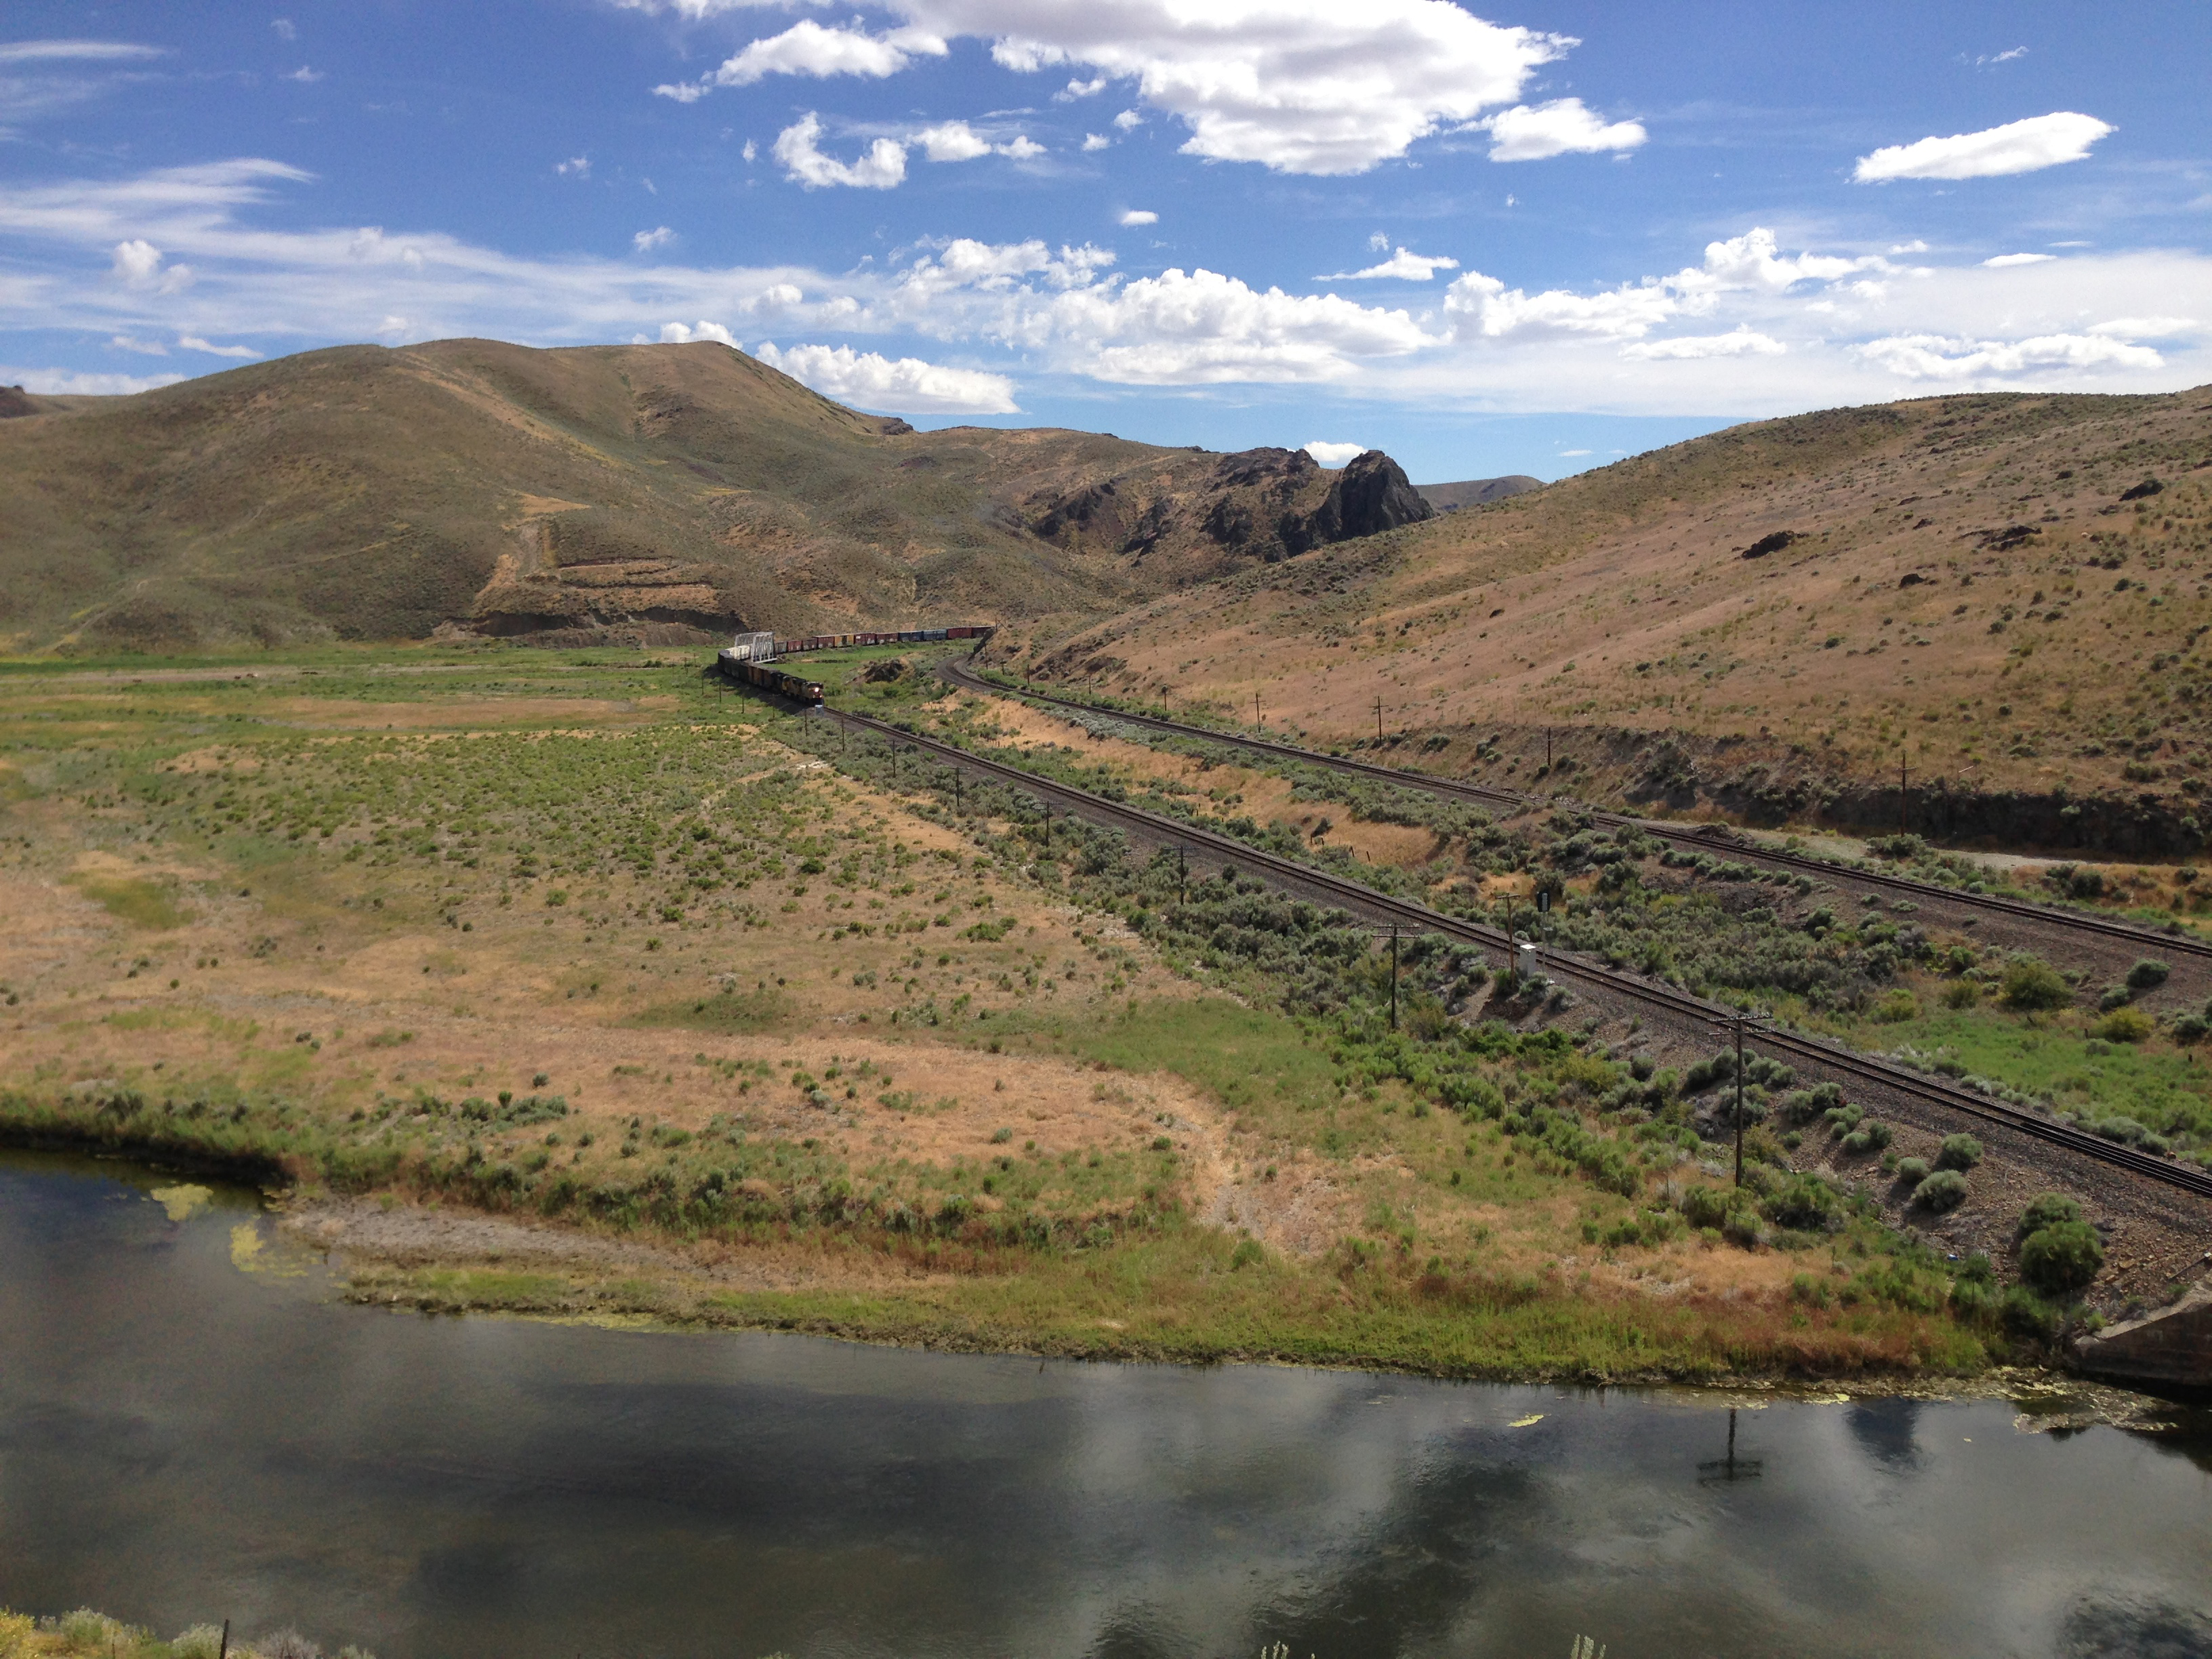 2014-06-21 15 46 41 Train approaching a railway bridge over the Humboldt River in Palisade, Nevada